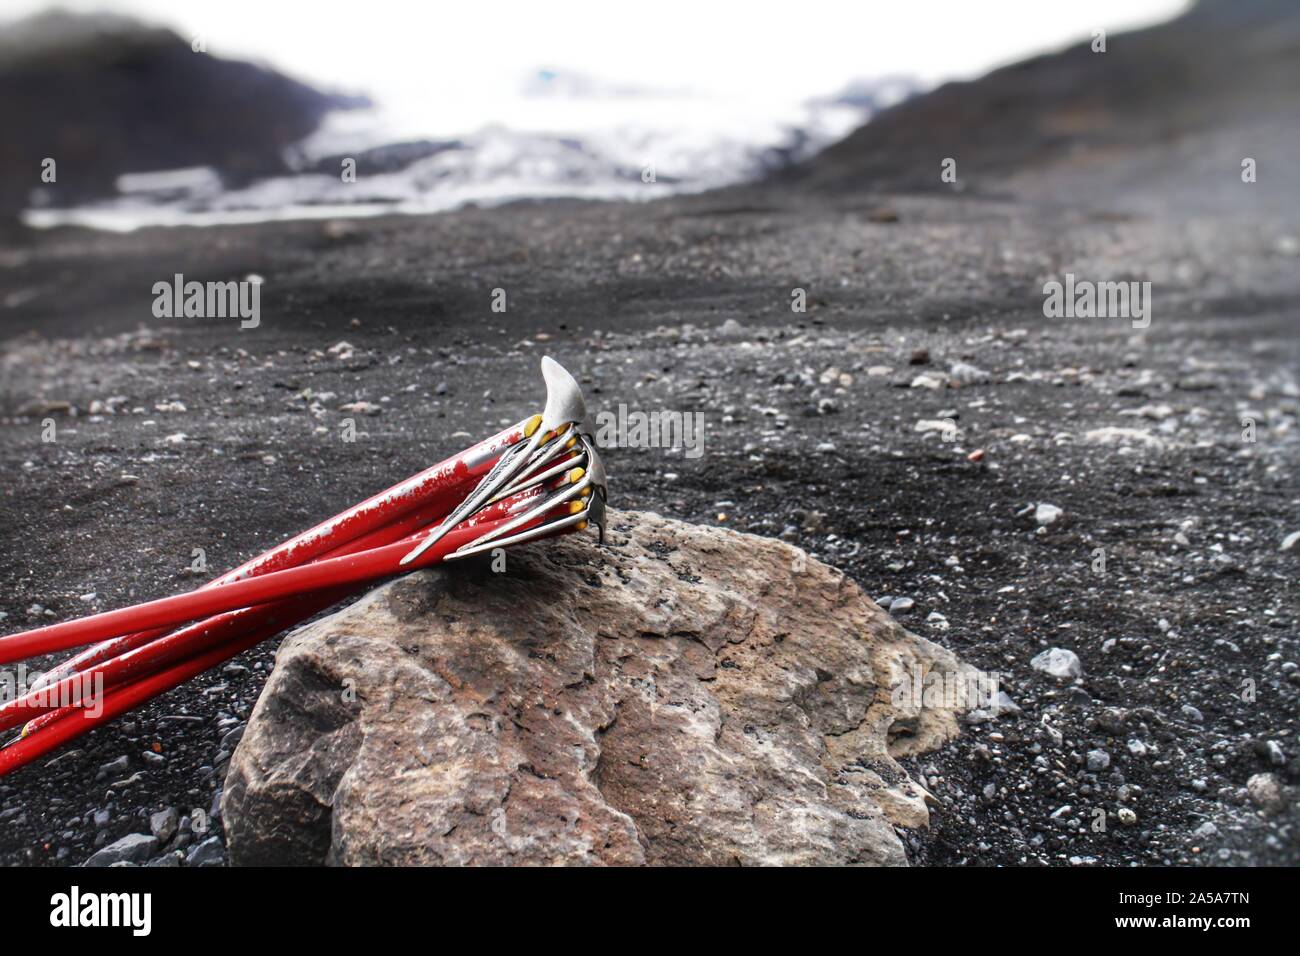 Climbing axes on a rock on Myrdalsjökull, a glacier on top of the Katla volcano in Iceland. The dark spots are ashes from nearby Eyjafjallajökull. Stock Photo